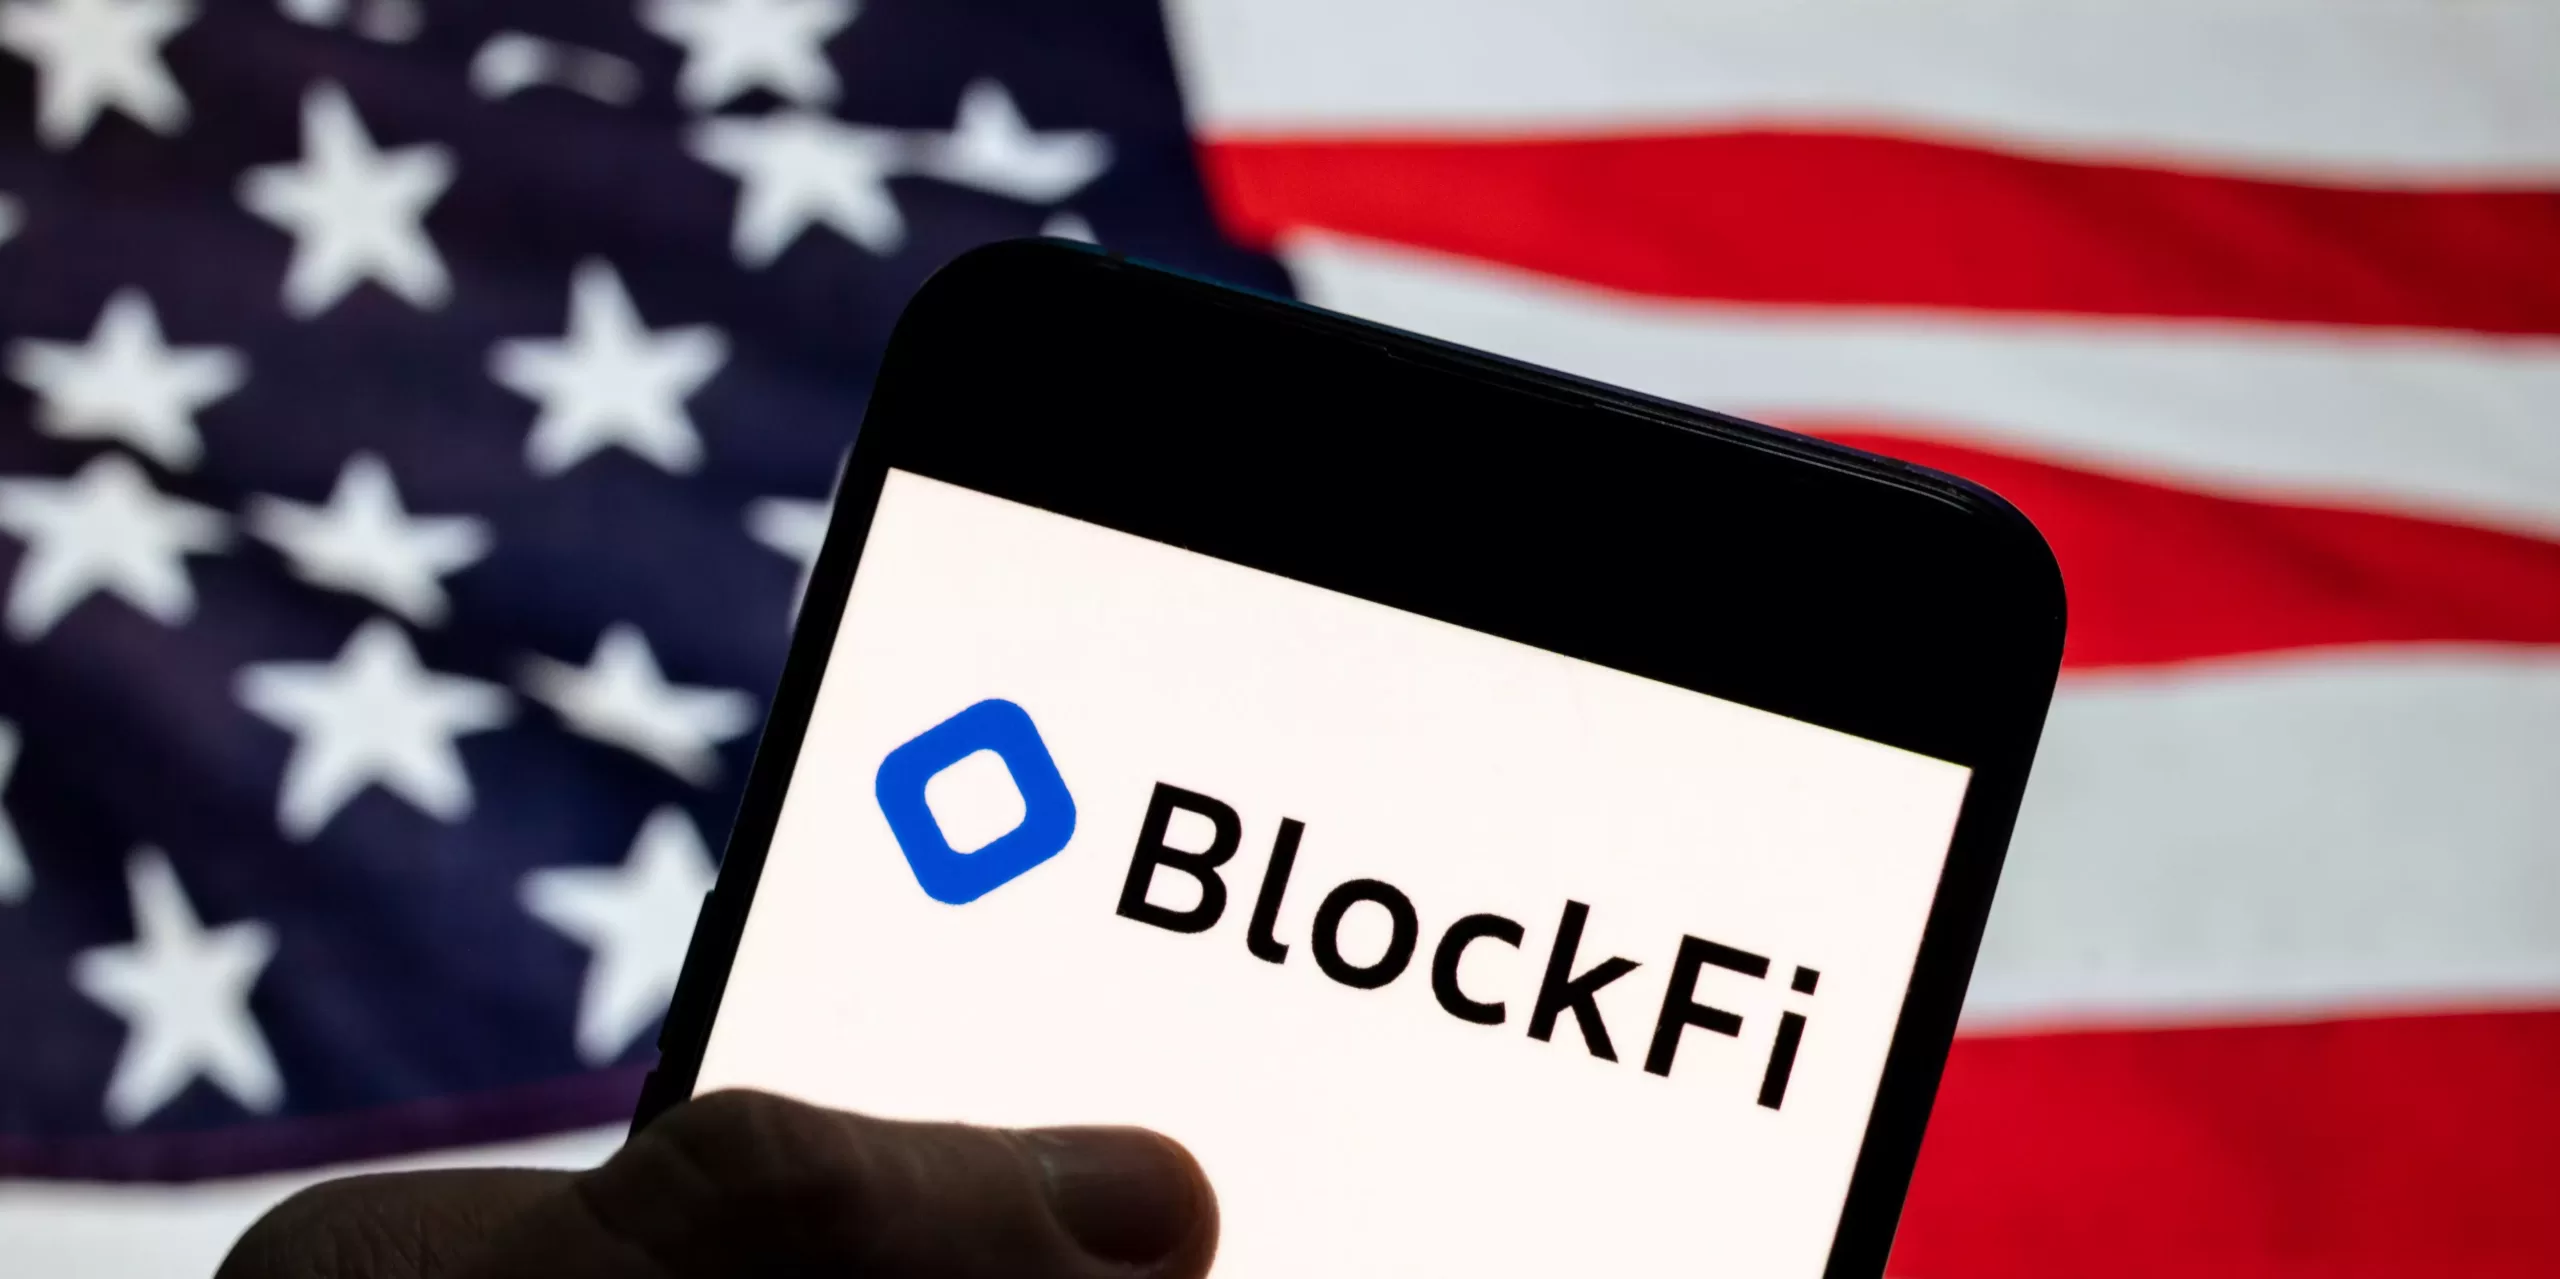 FTX.US will acquire BlockFi at cost of $240 million 4